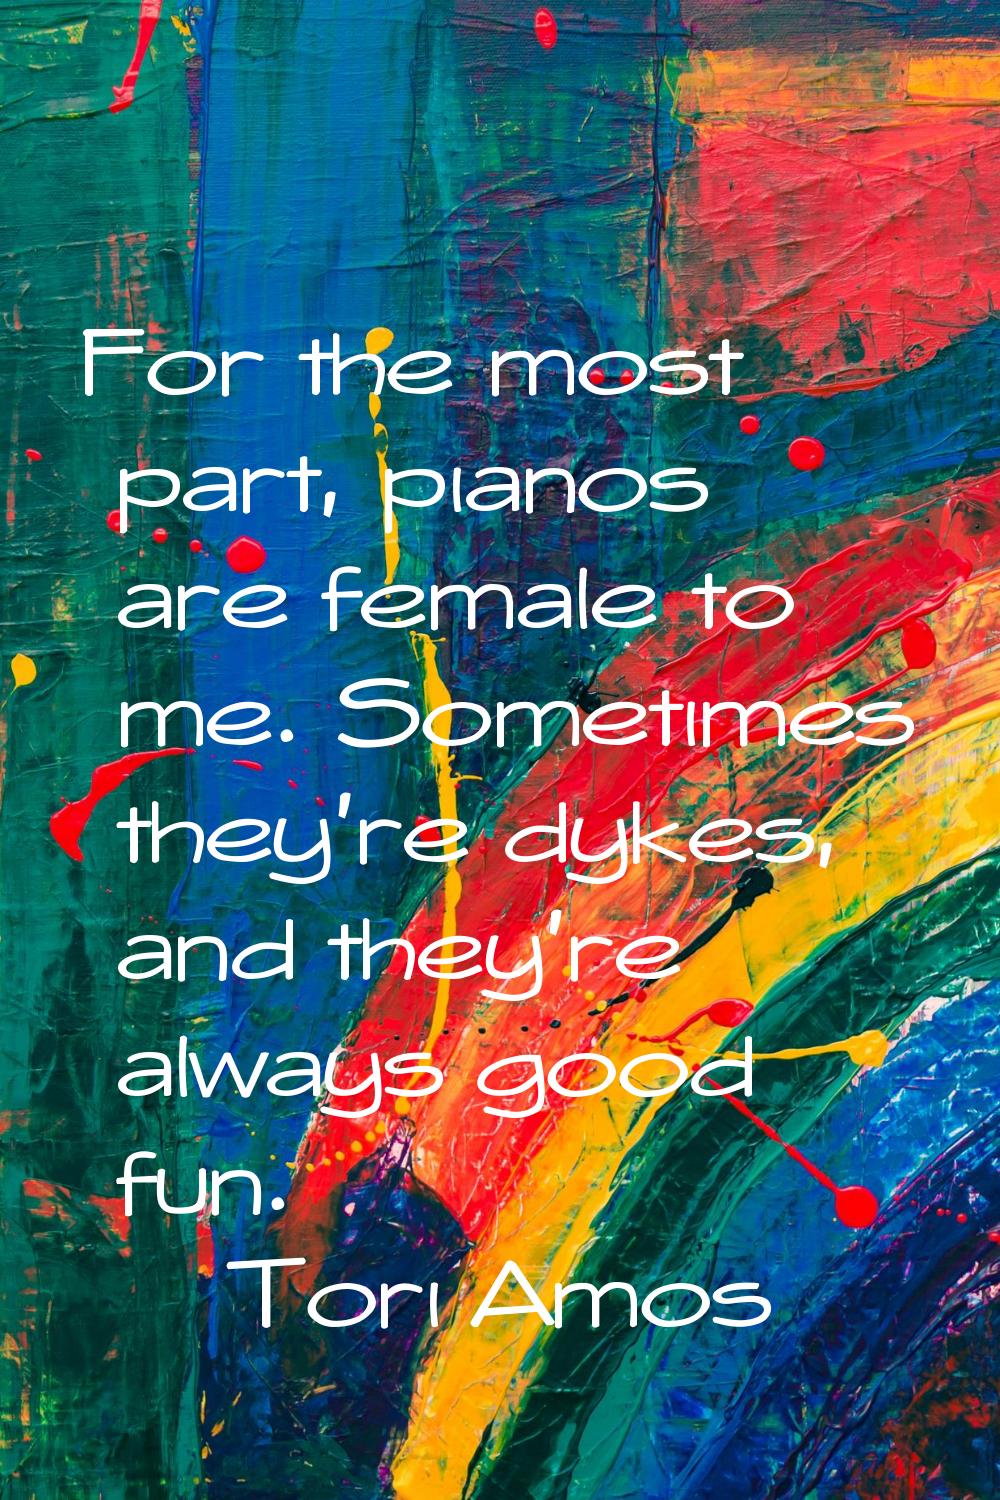 For the most part, pianos are female to me. Sometimes they're dykes, and they're always good fun.